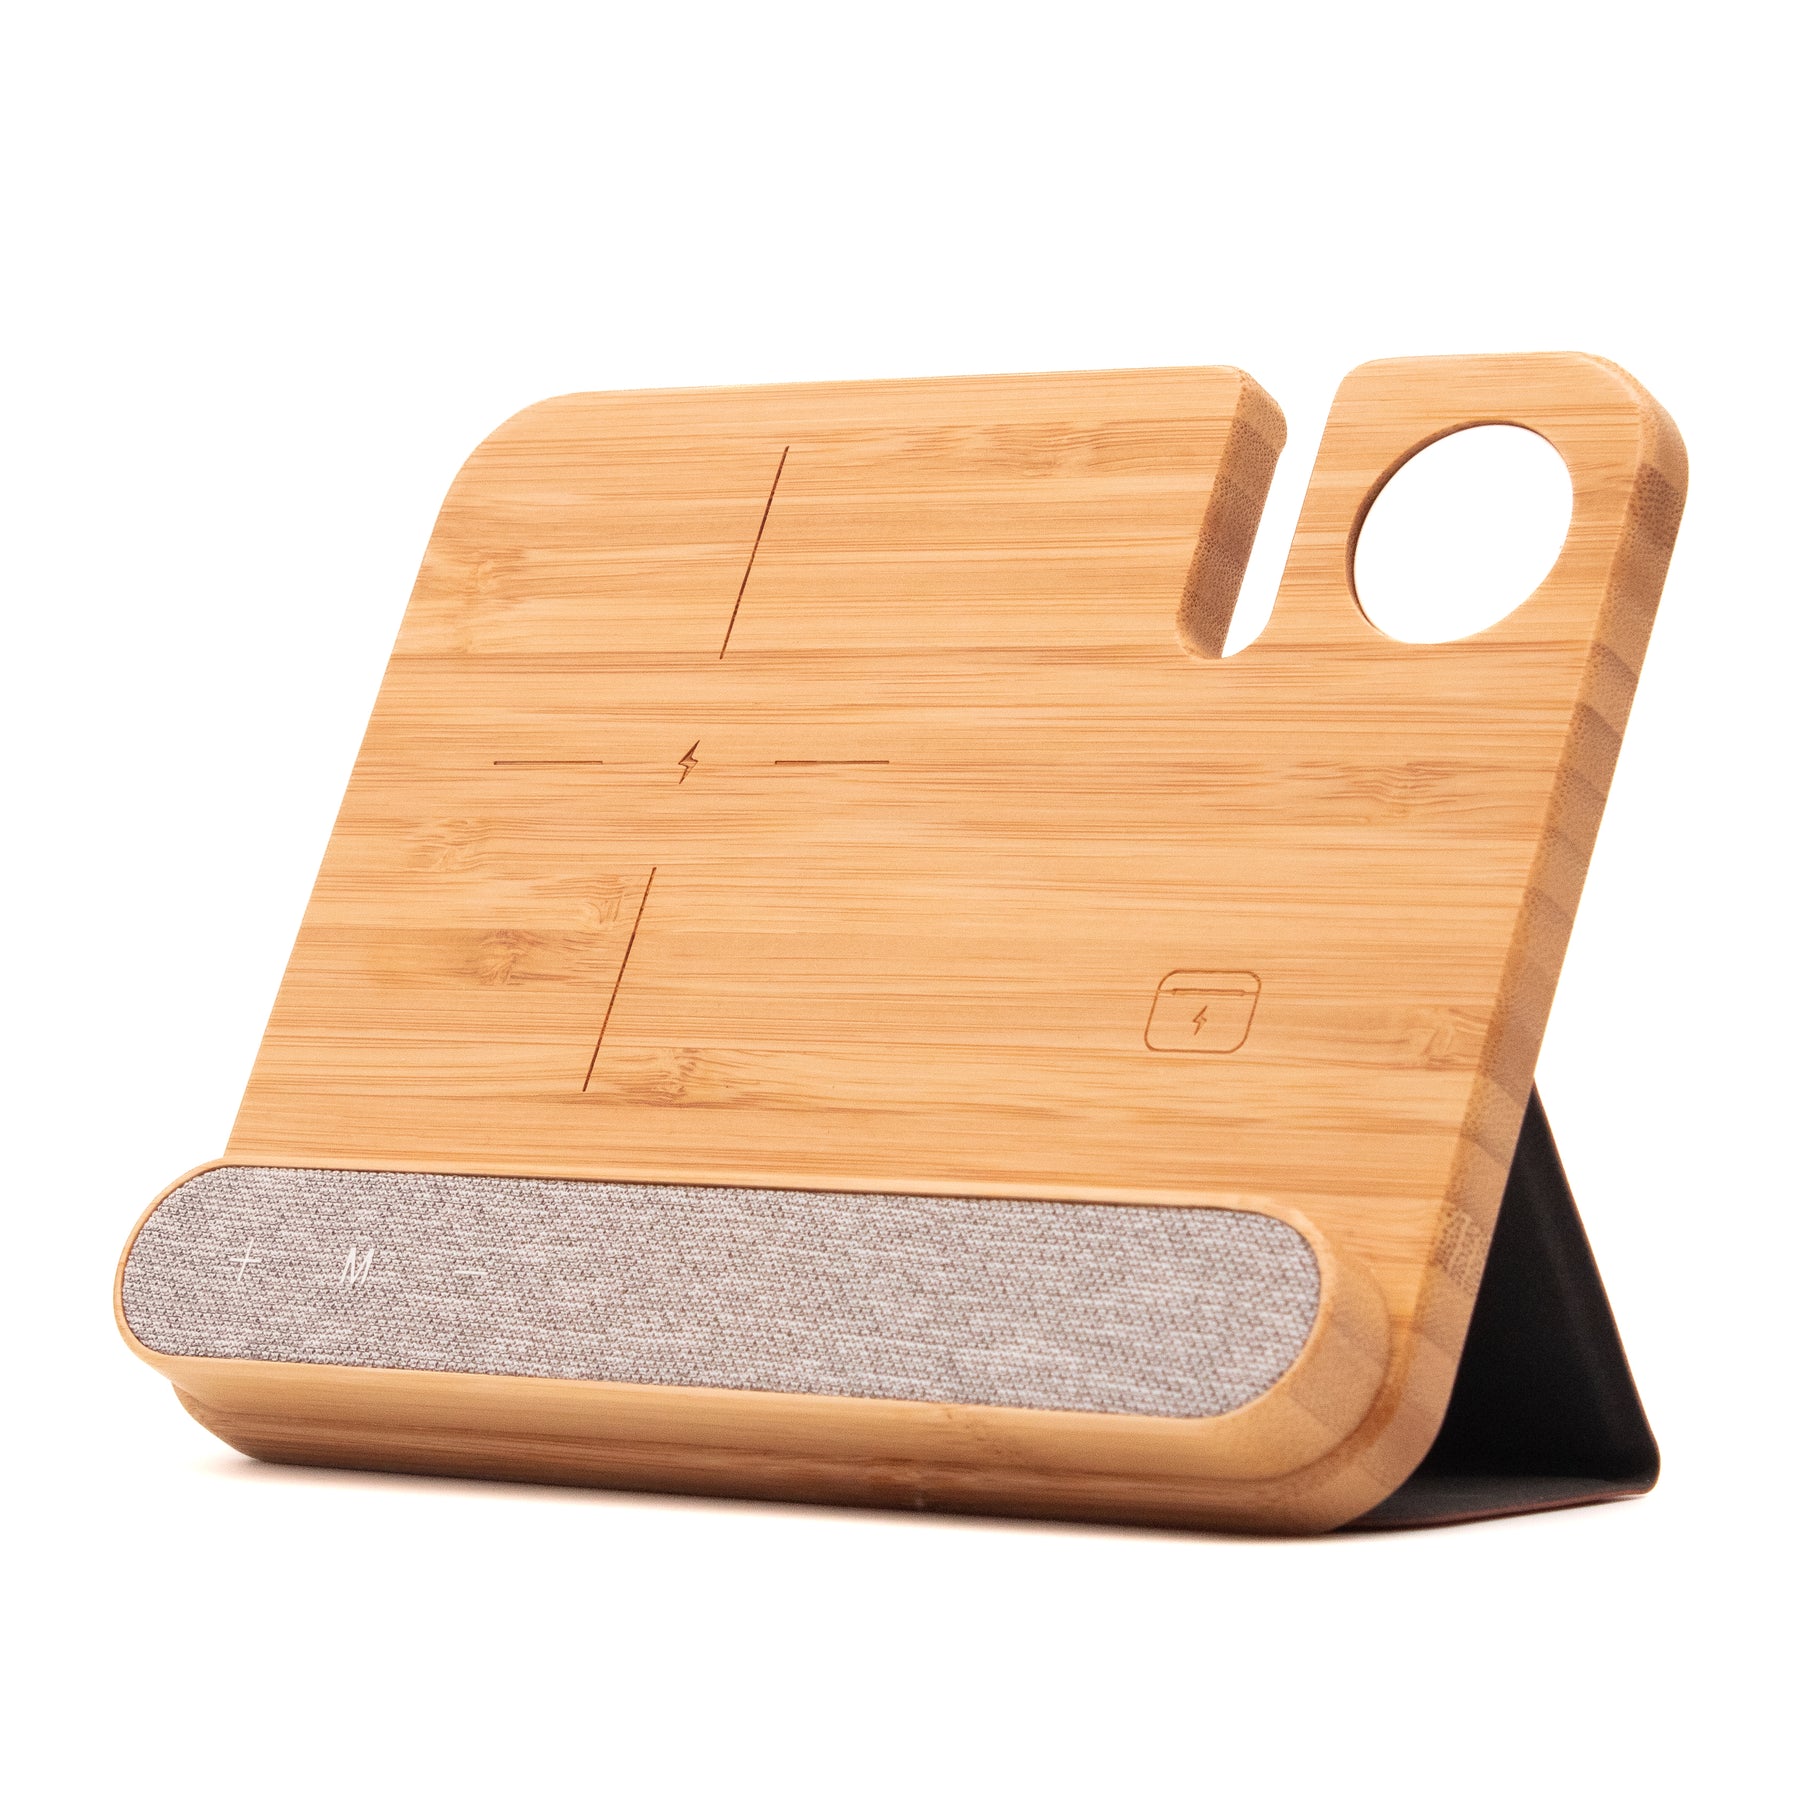 3 in 1 Wooden Charger - Apple watch version